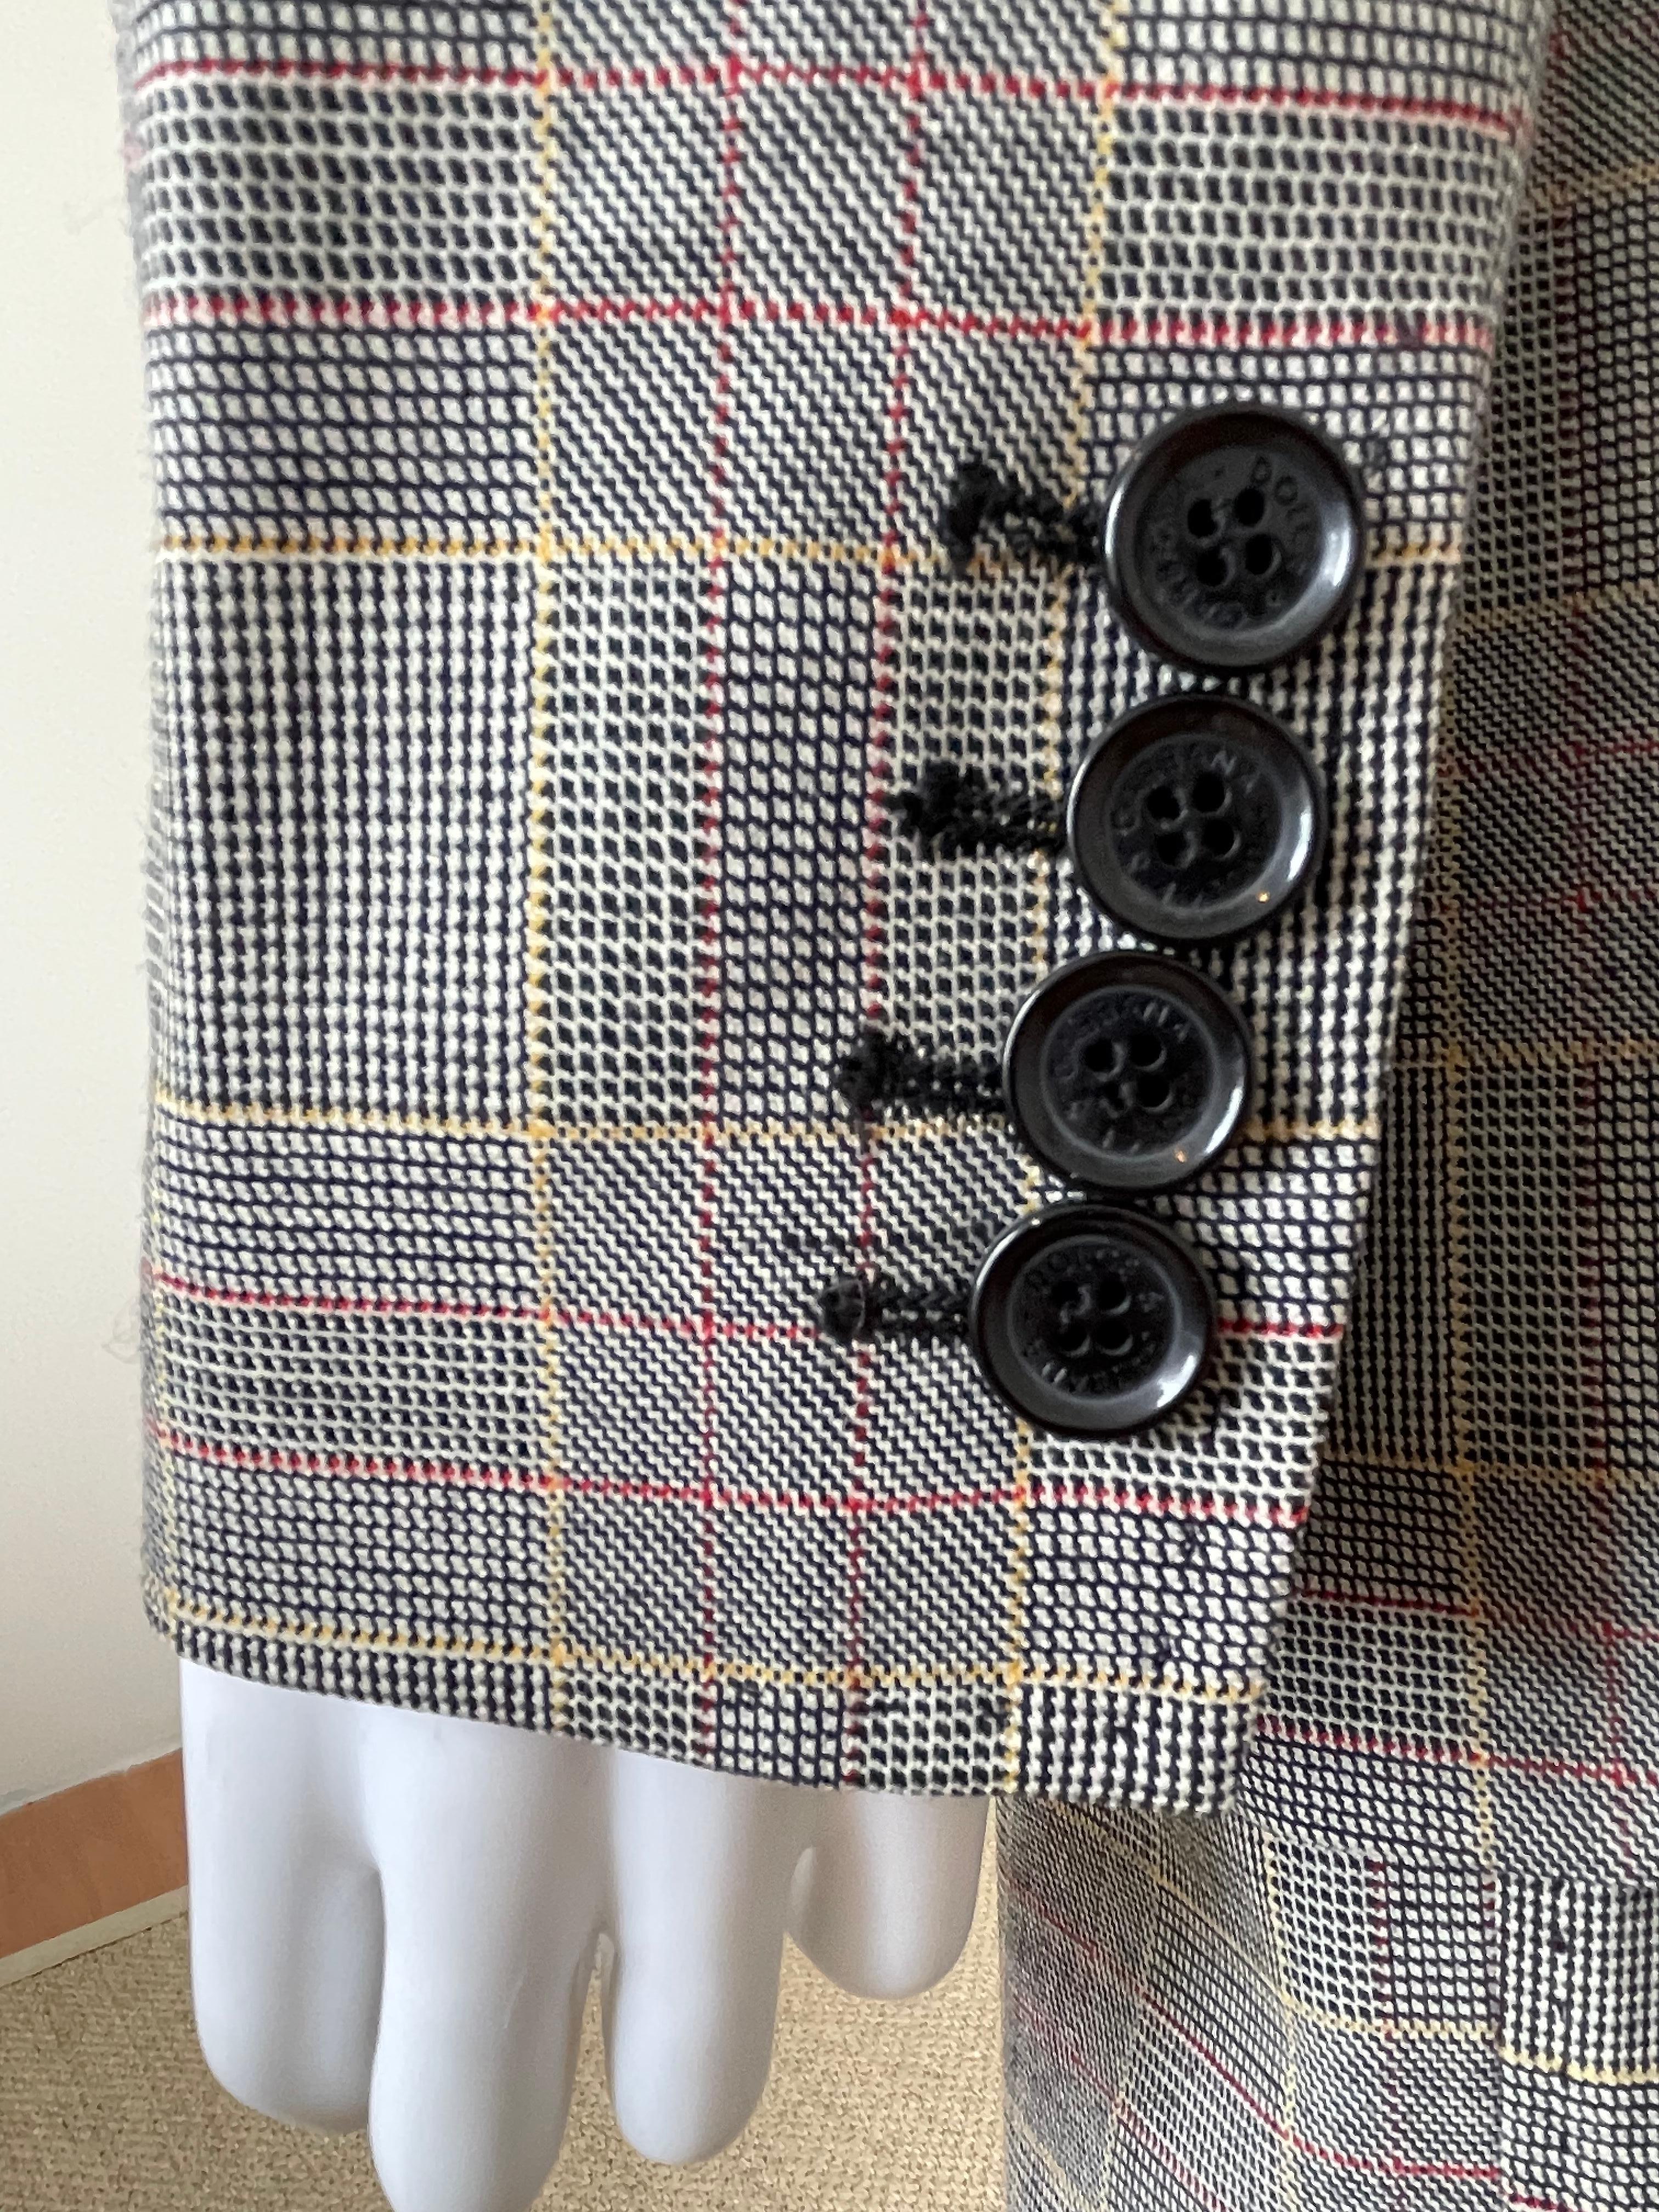 Dolce and Gabbana Wool Plaid Peak Lapel Blazer with Matching Pants Suit For Sale 2